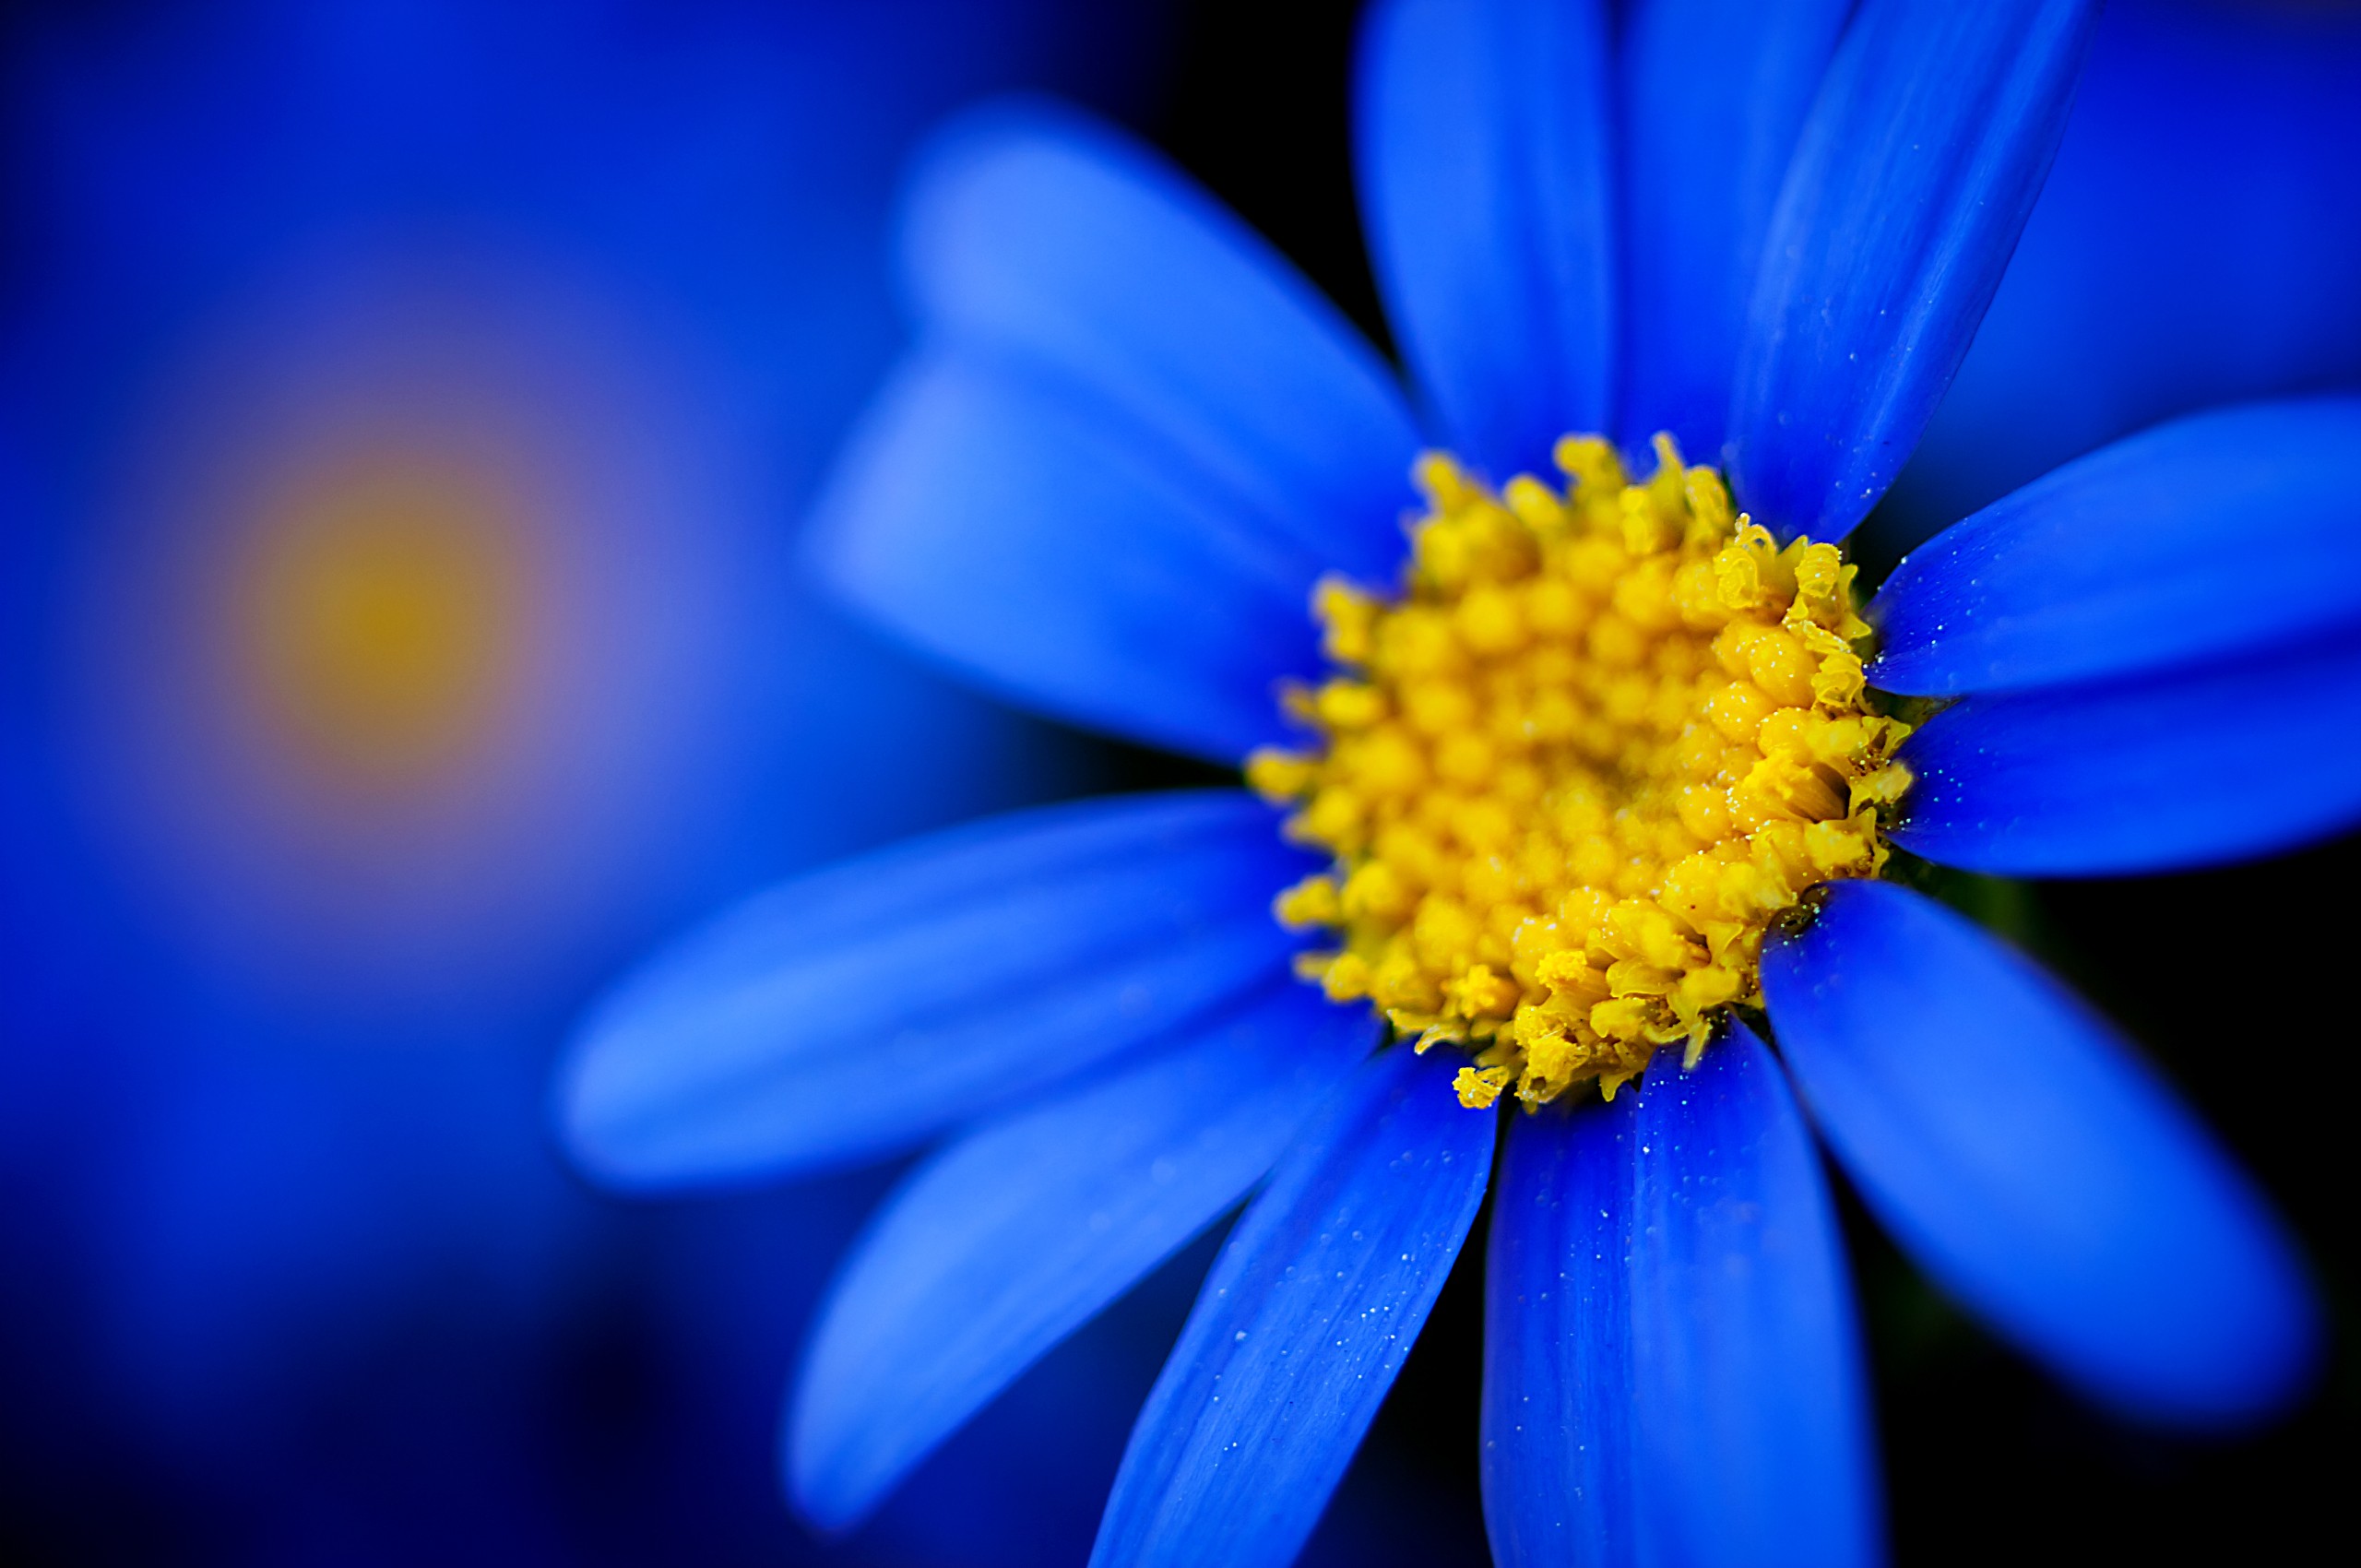 Flowers Backgrounds, 336182 Blue Flowers Wallpapers, by Ernie Cate